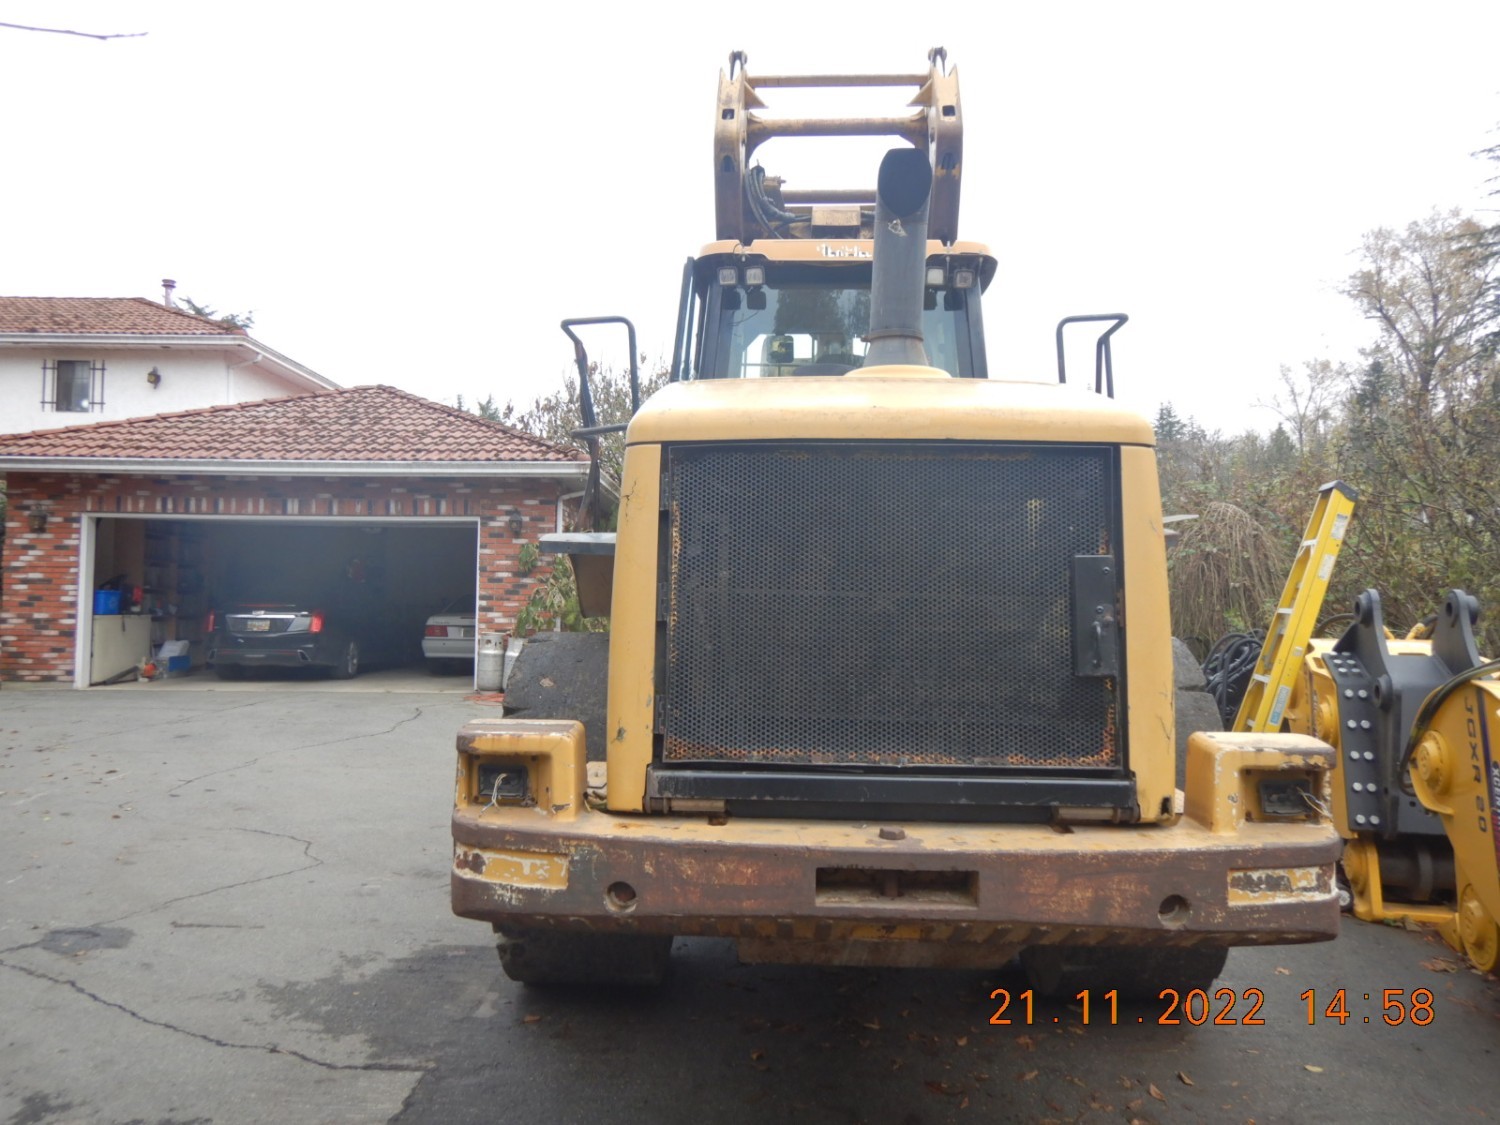 sold-2010-cat-966h-cw-custom-daequip-dual-log-or-pipe-grapple-with-internal-grapple-to-keep-pipe-logs-poles-secure-big-5